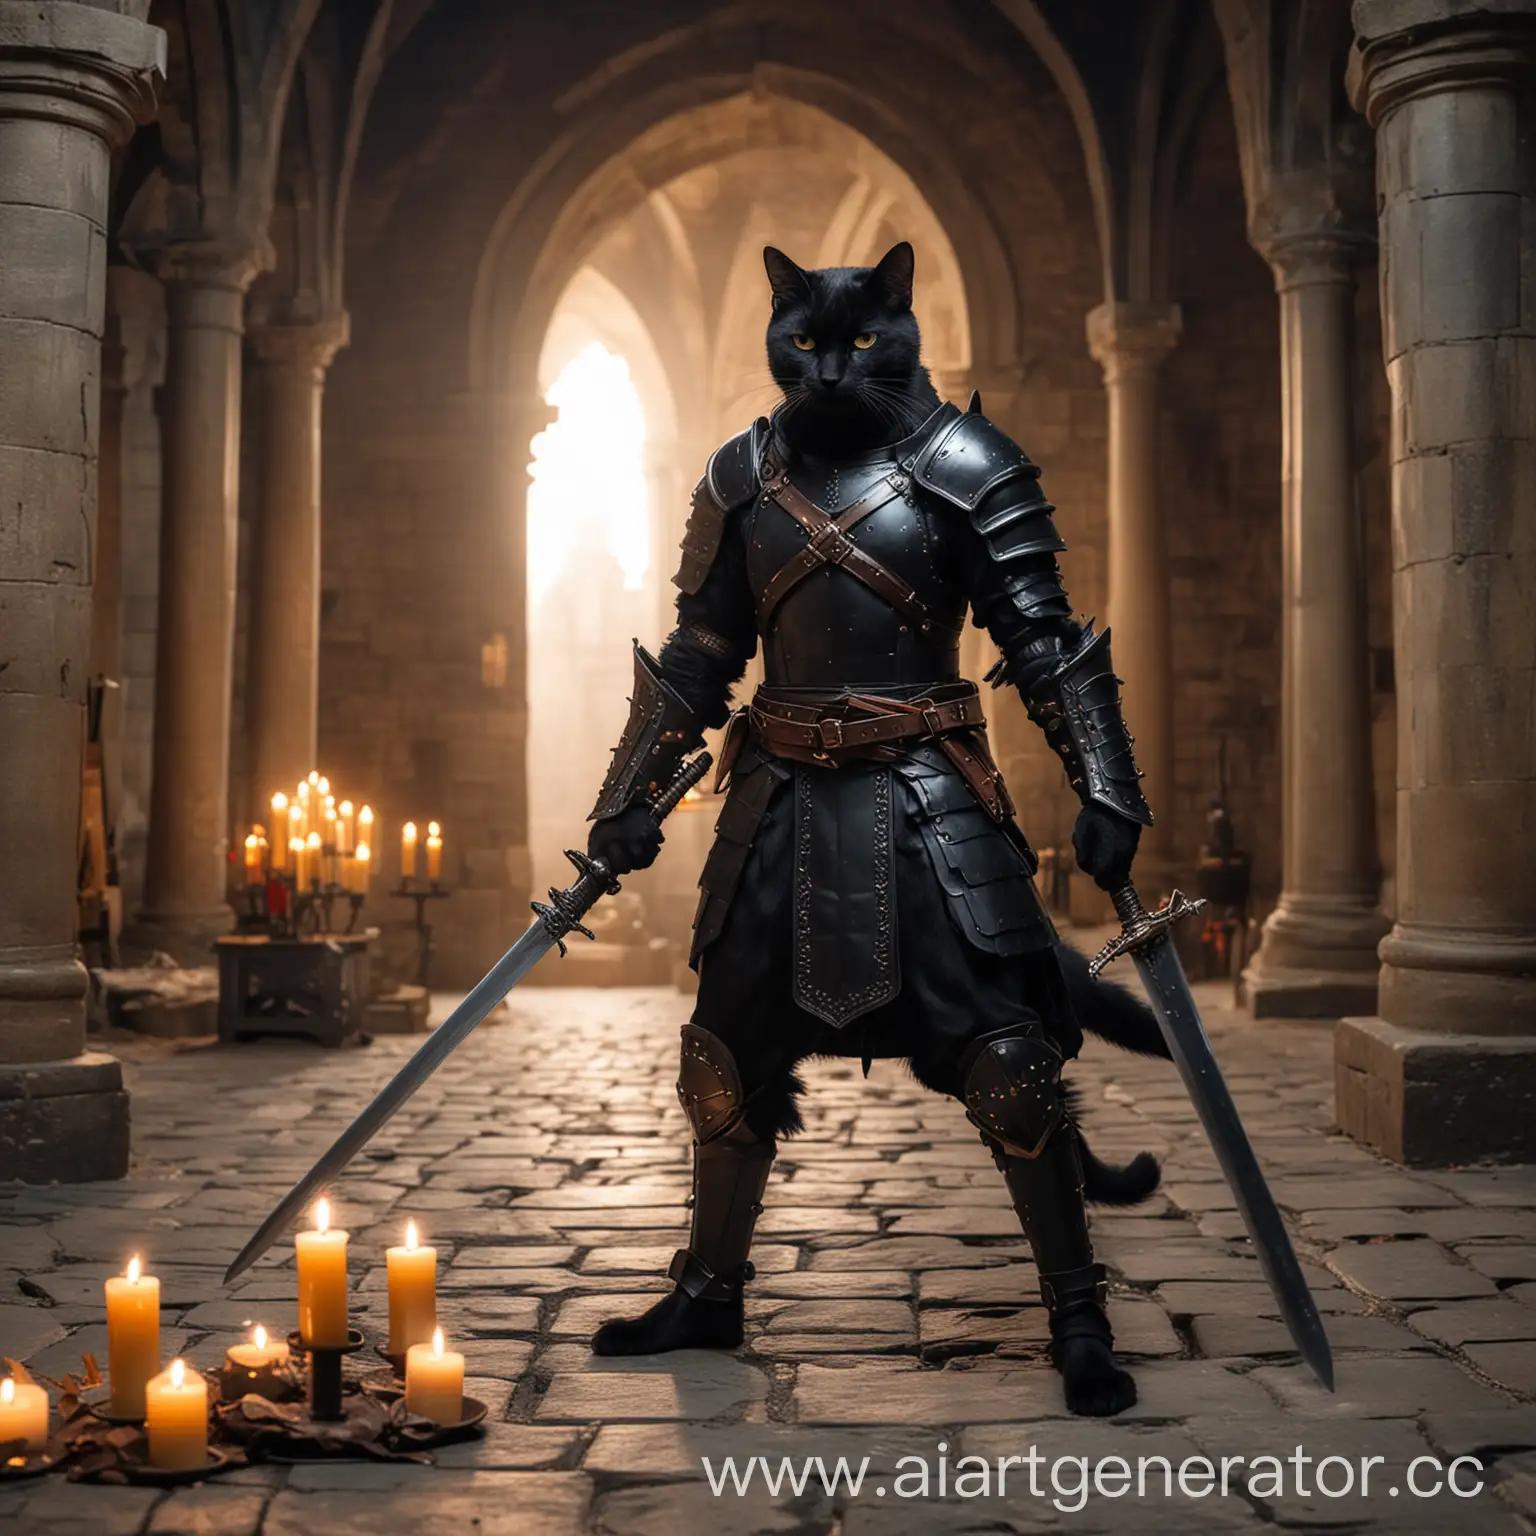 Black-Cat-Knight-Guarding-Candlelit-Castle-with-Sword